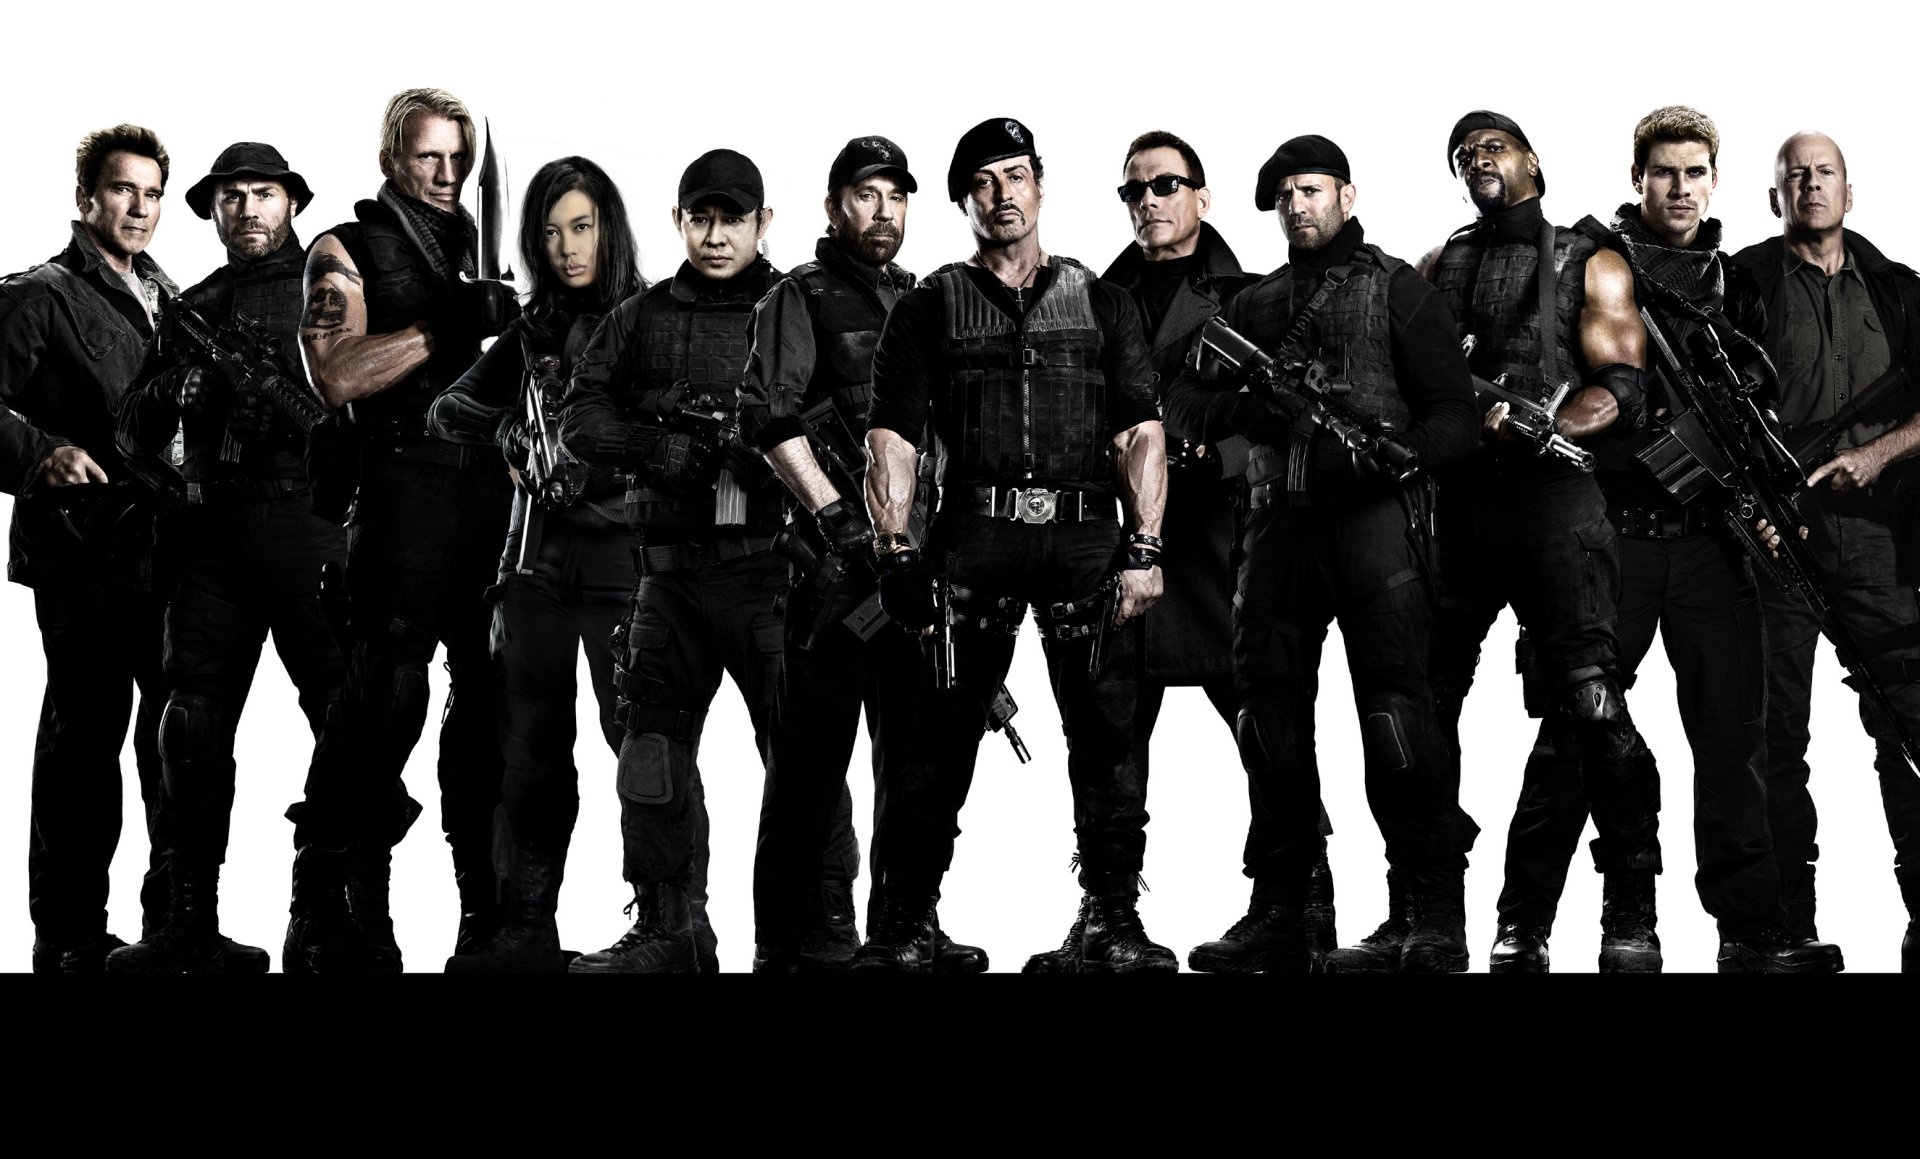 Jet Li, Trench character, Expendables wallpapers, Action-packed images, 1920x1160 HD Desktop